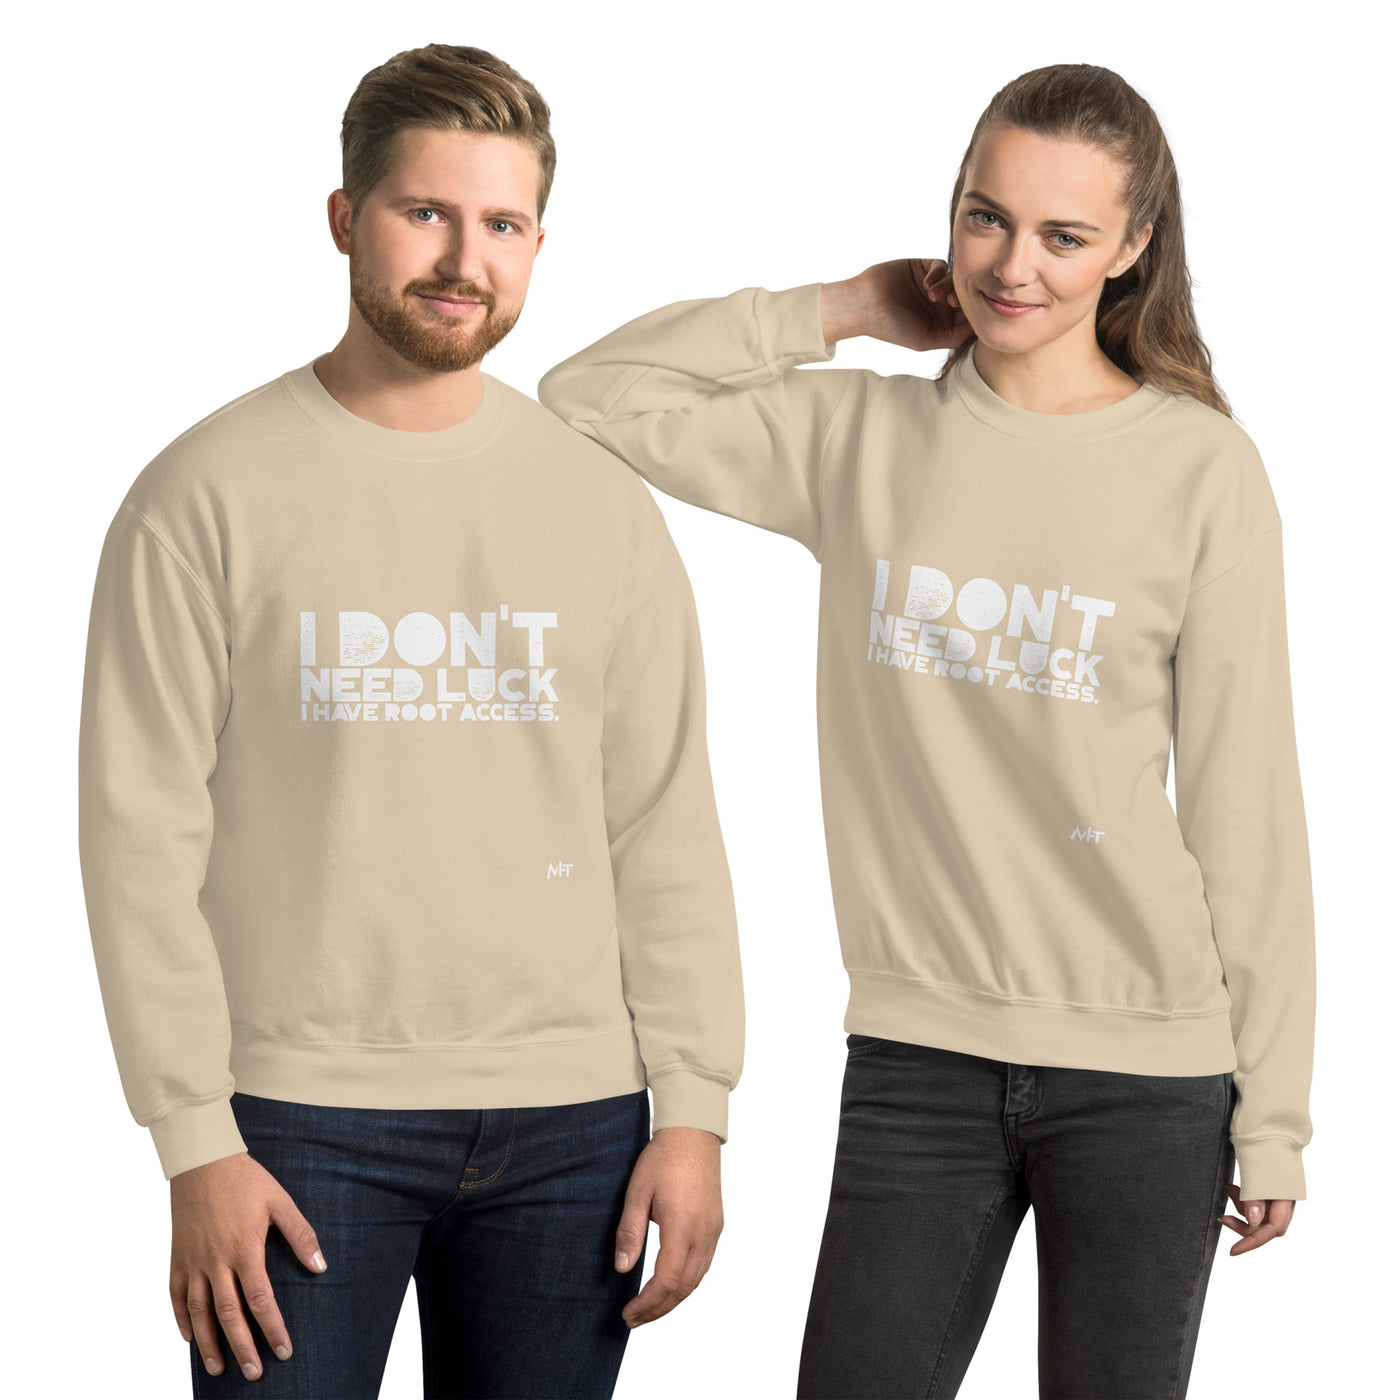 I Don't Need Luck: I Have Root Access - Unisex Sweatshirt